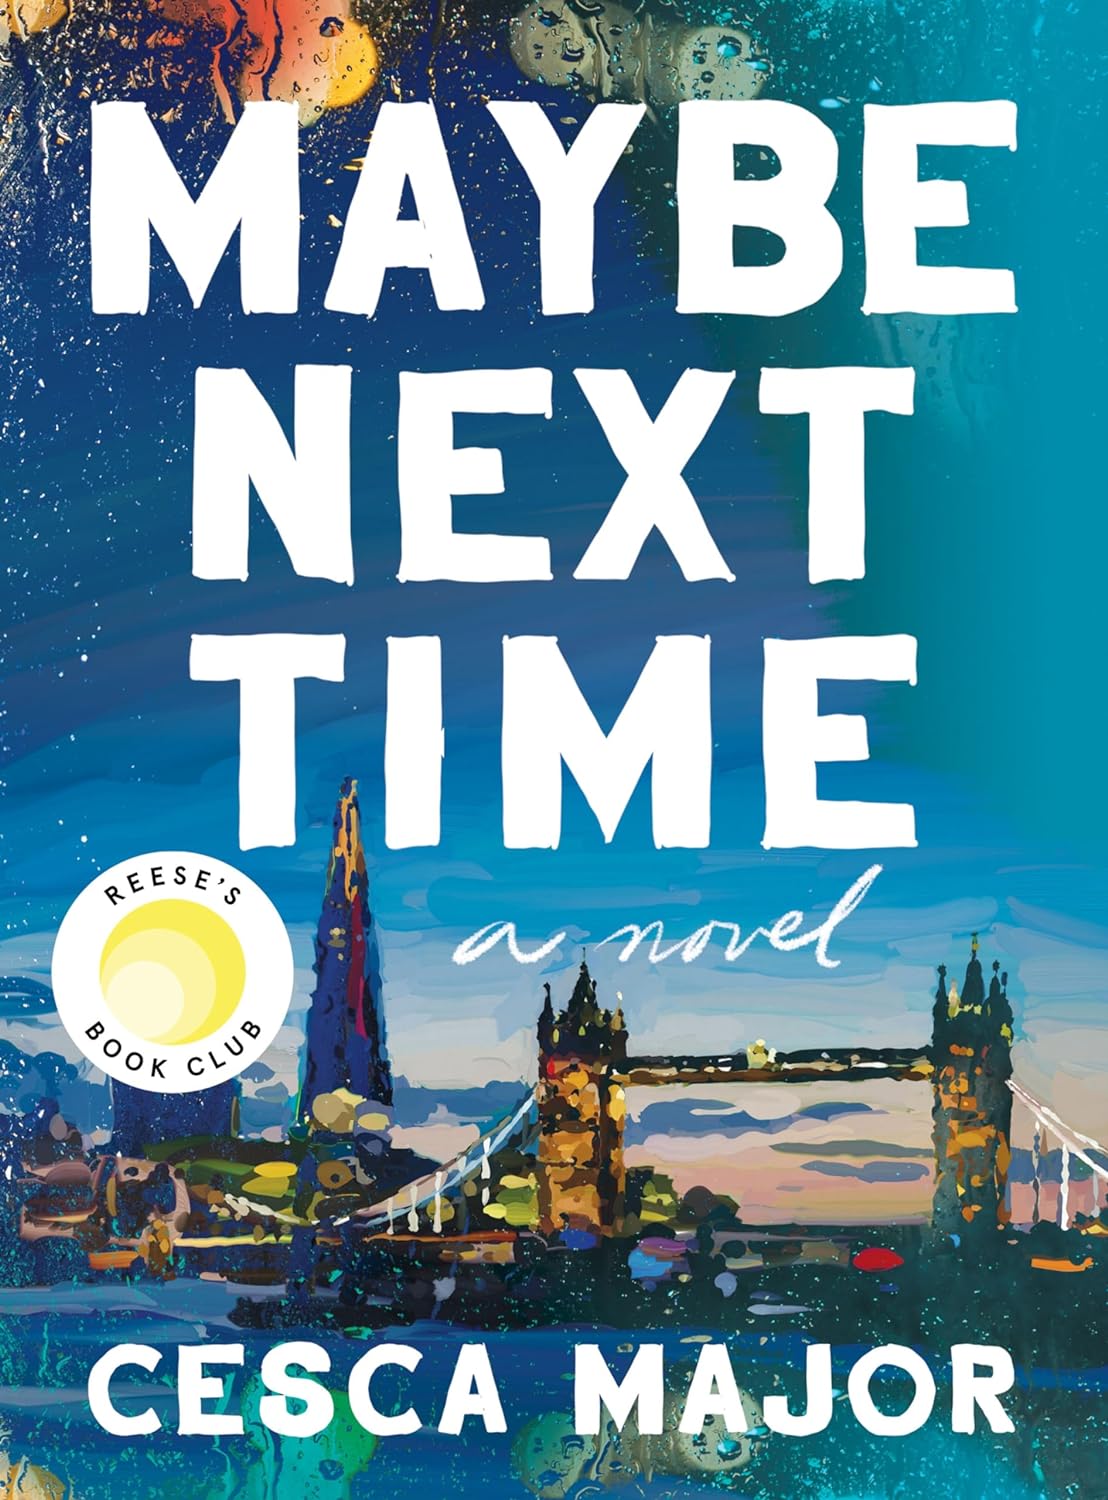 One of our recommended books is Maybe Next Time by Cesca Major